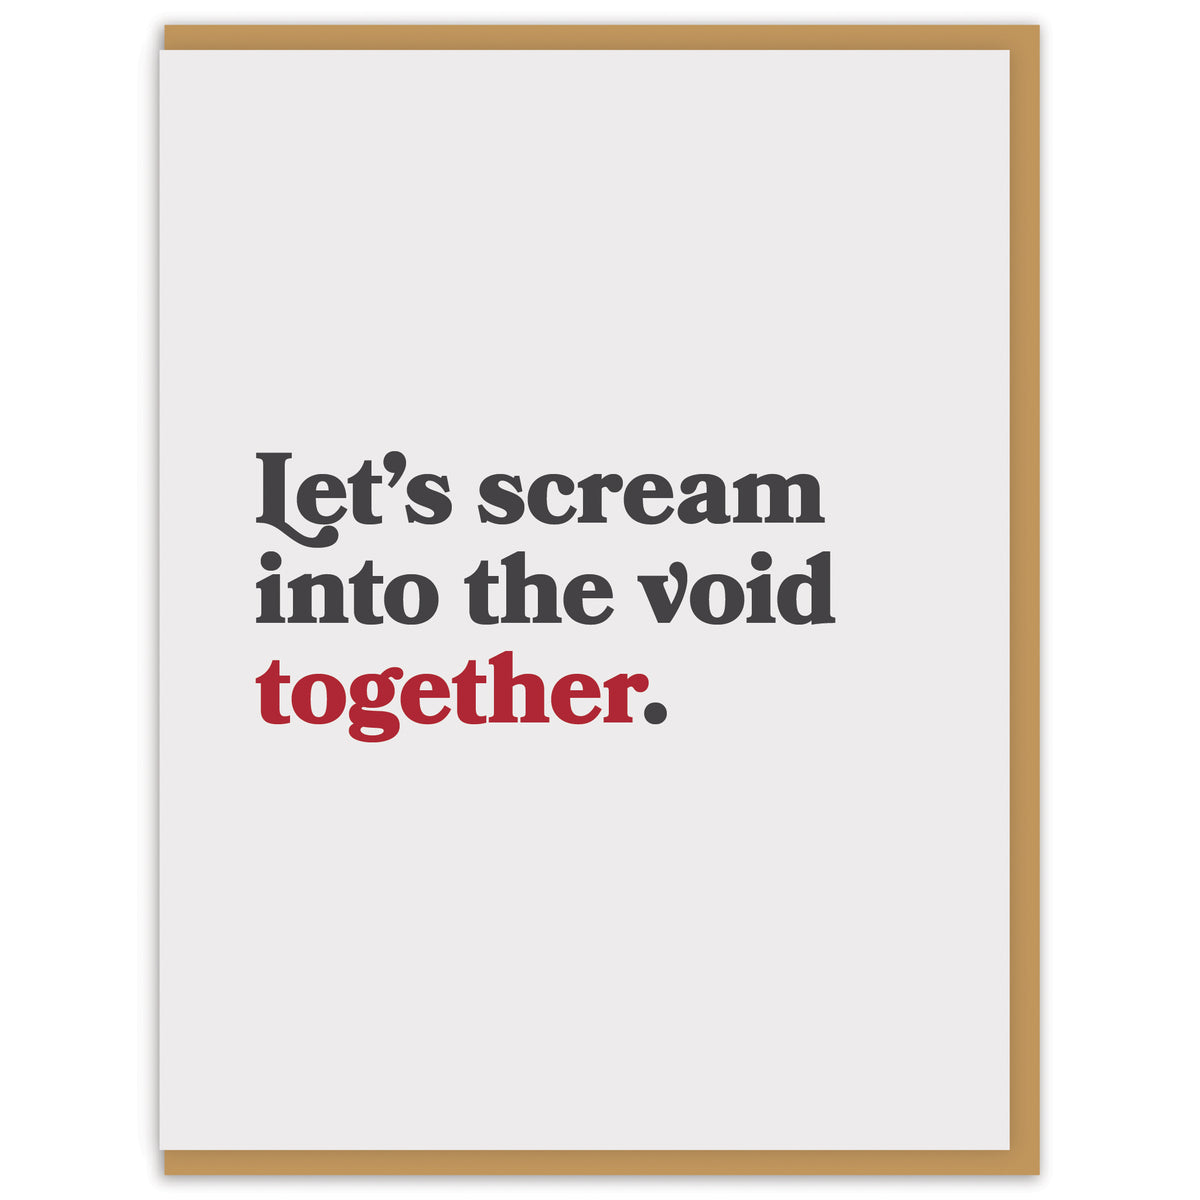 Let&#39;s scream into the void together.